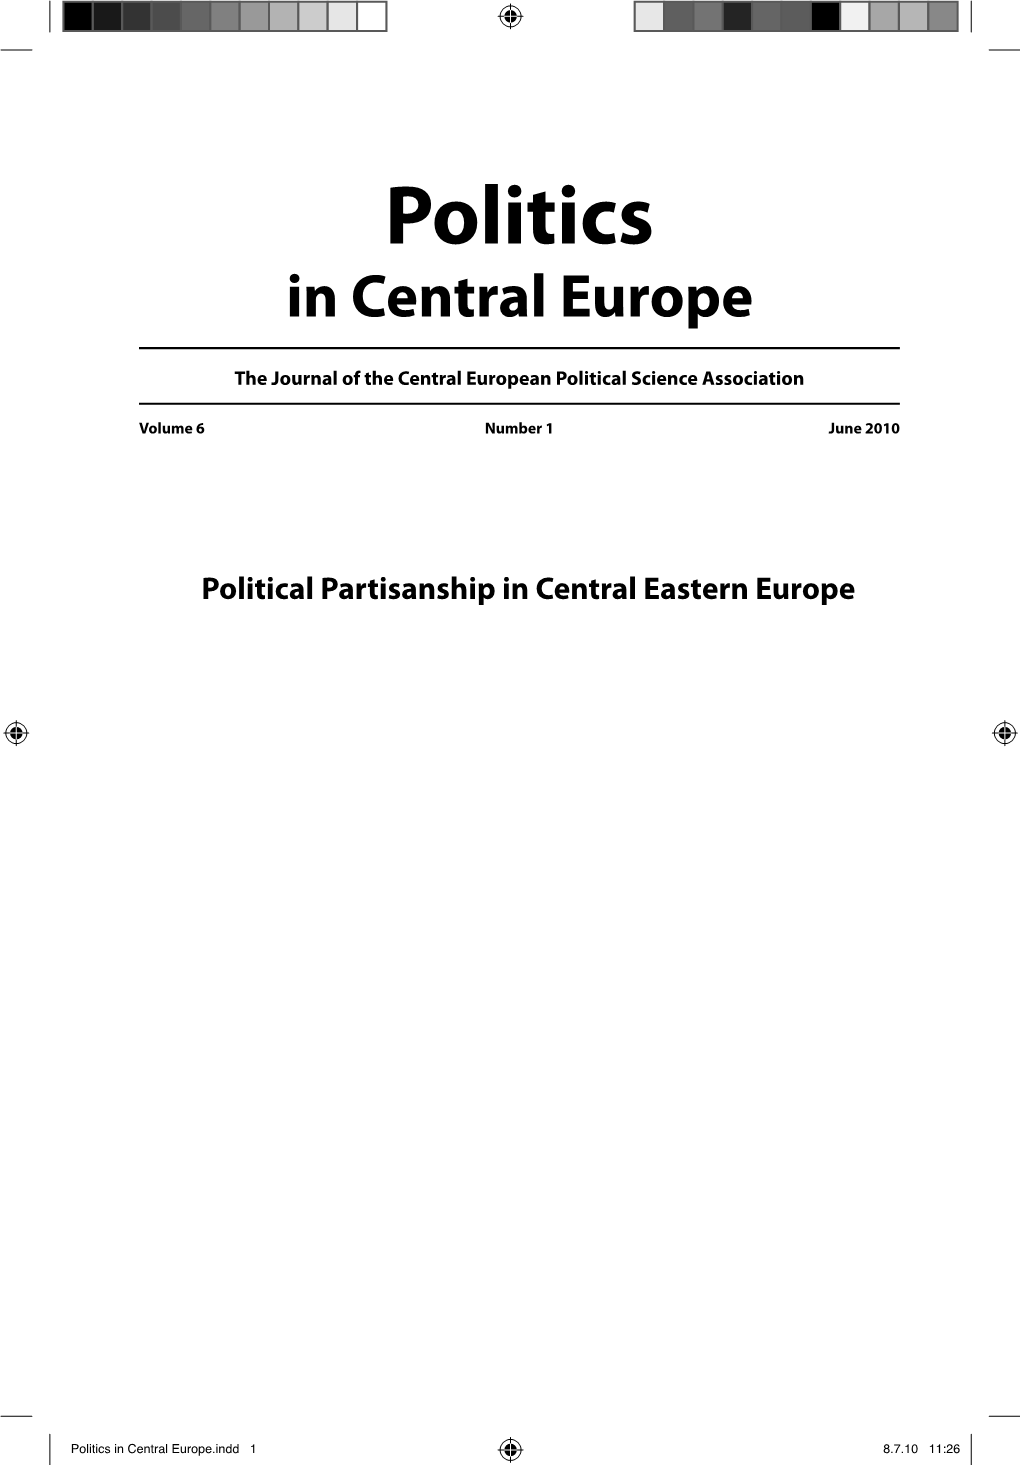 Politics in Central Europe.Indd